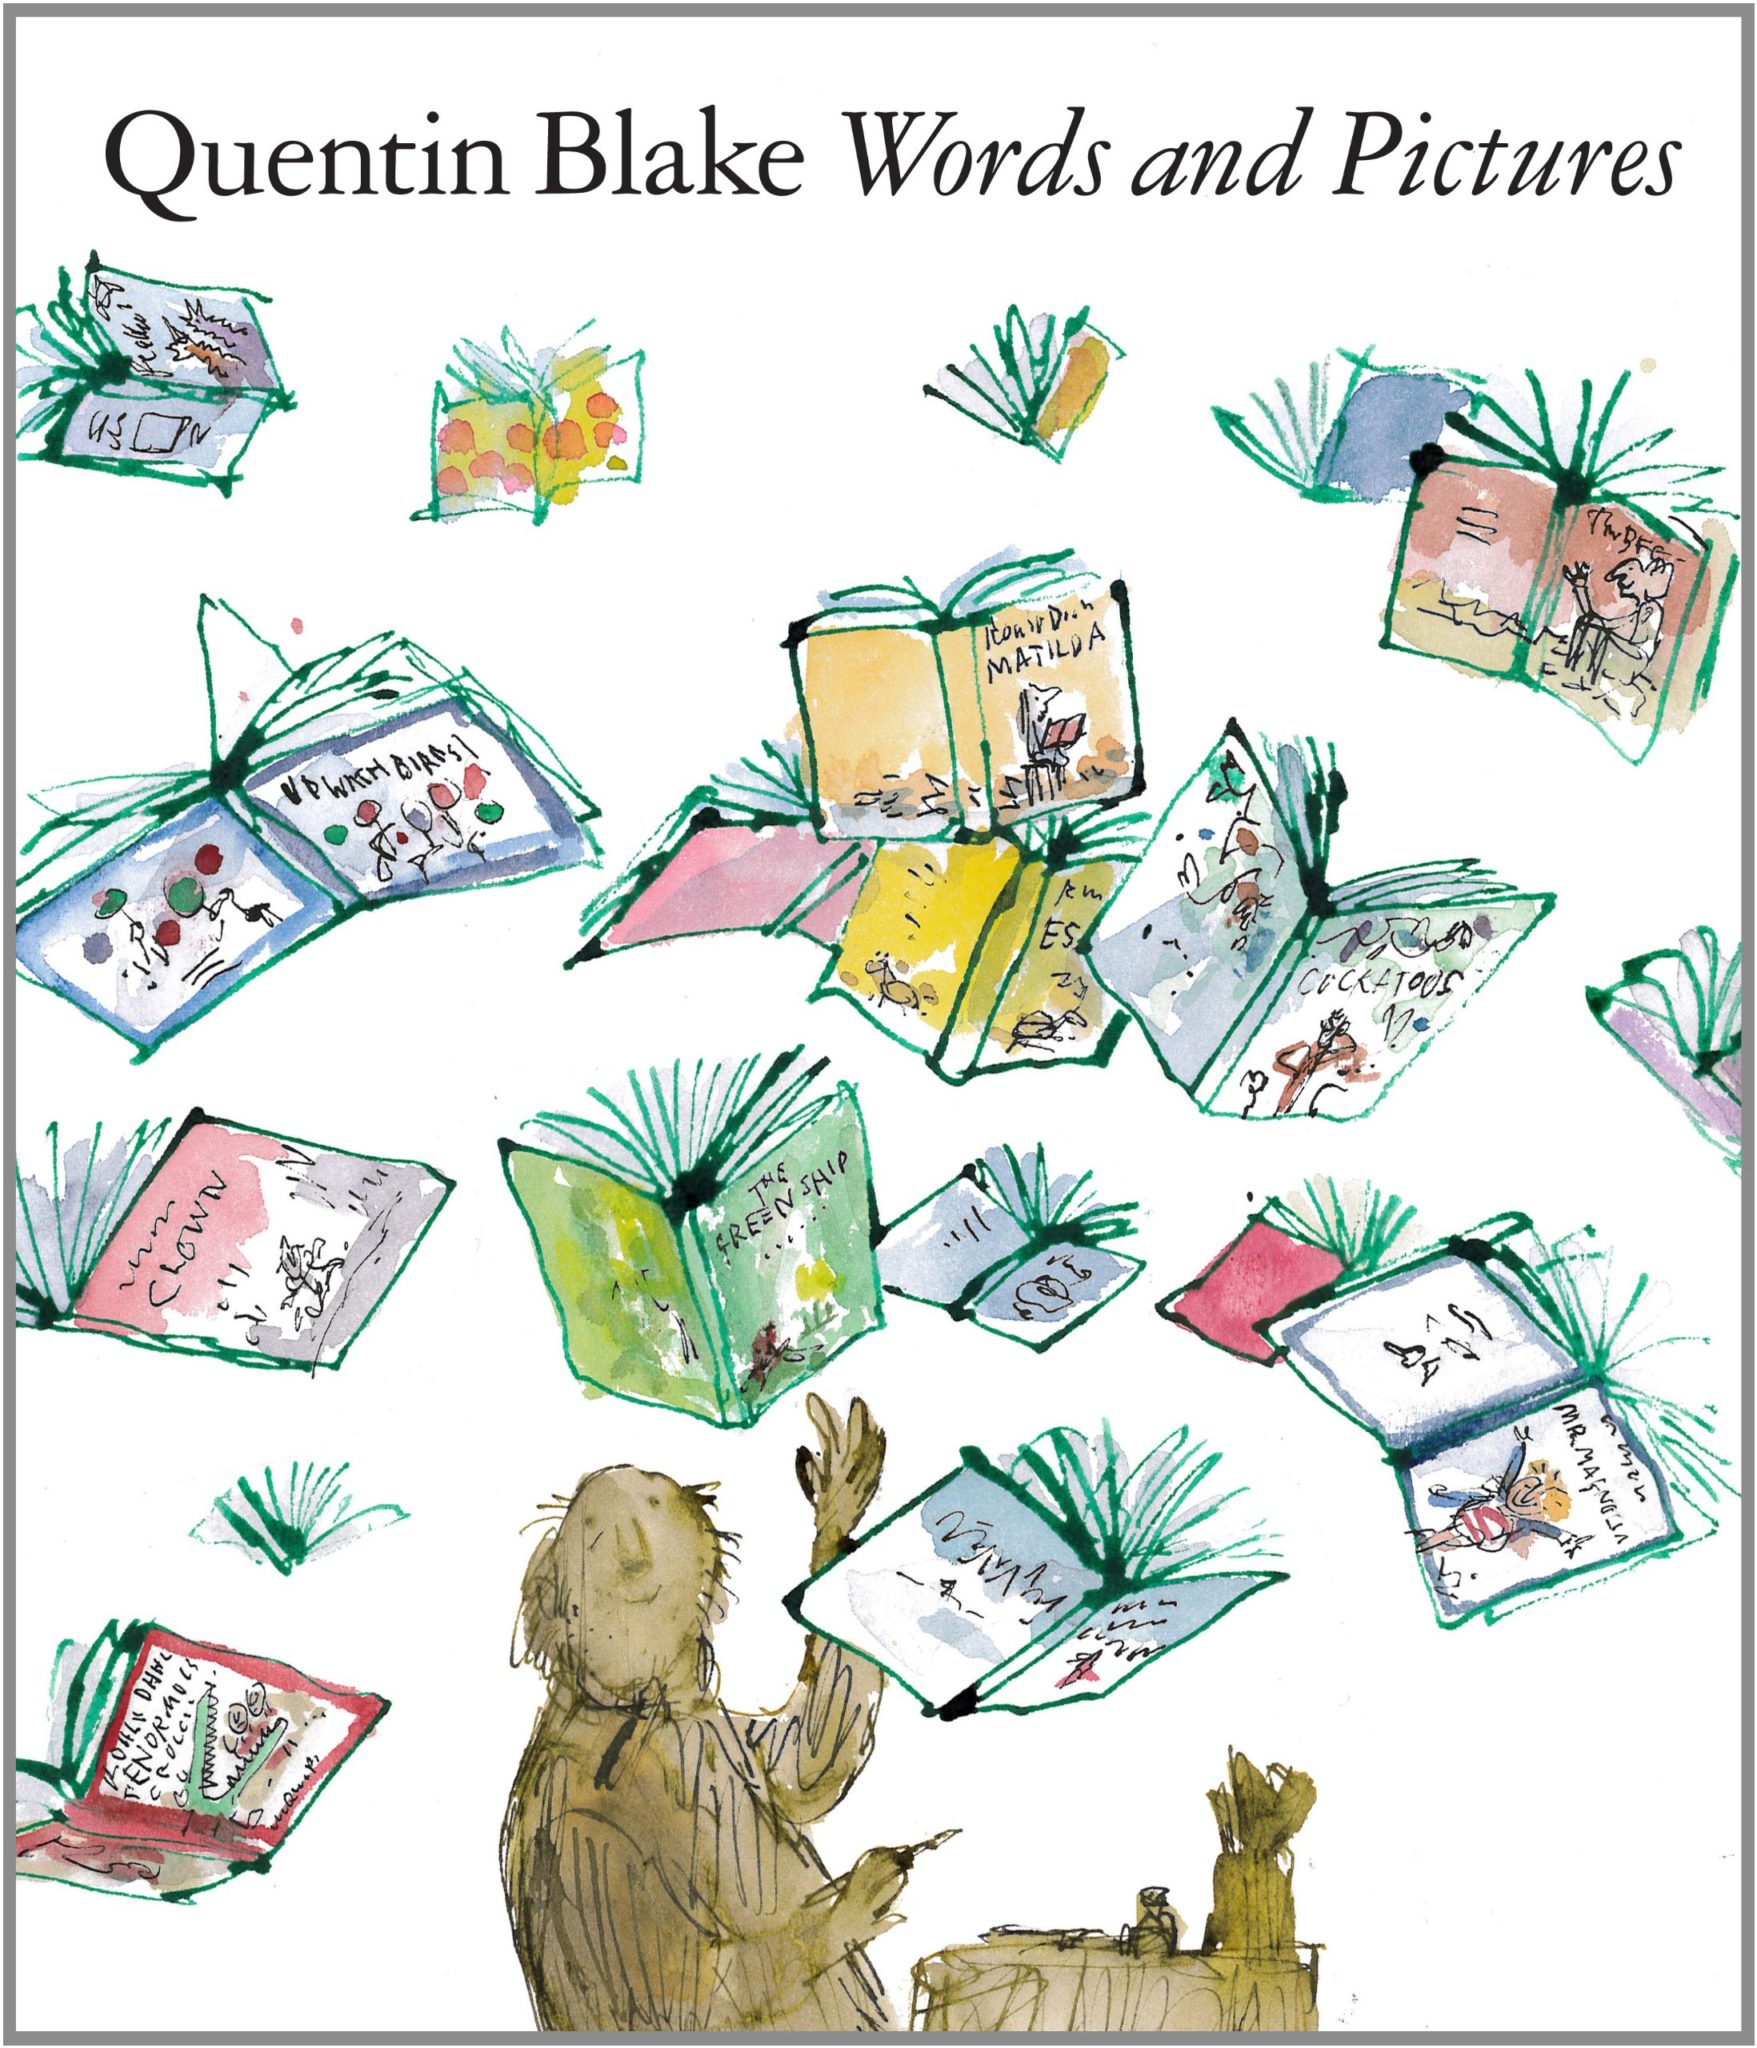 Words and Pictures: Quentin Blake